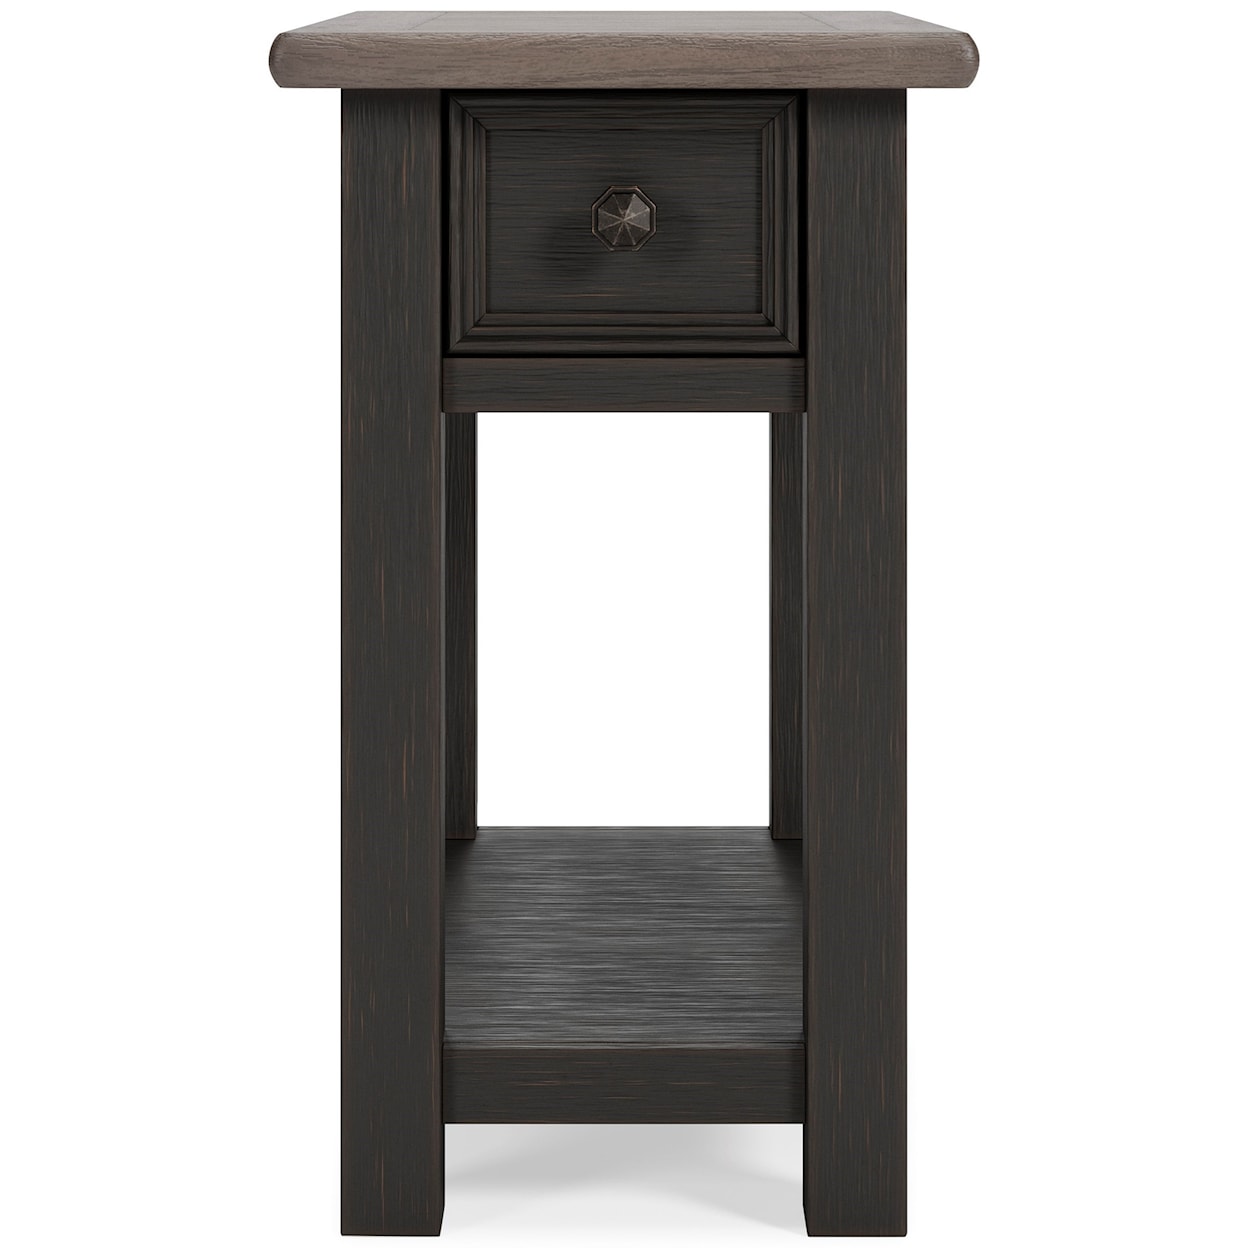 Signature Design Tyler Creek Chair Side End Table